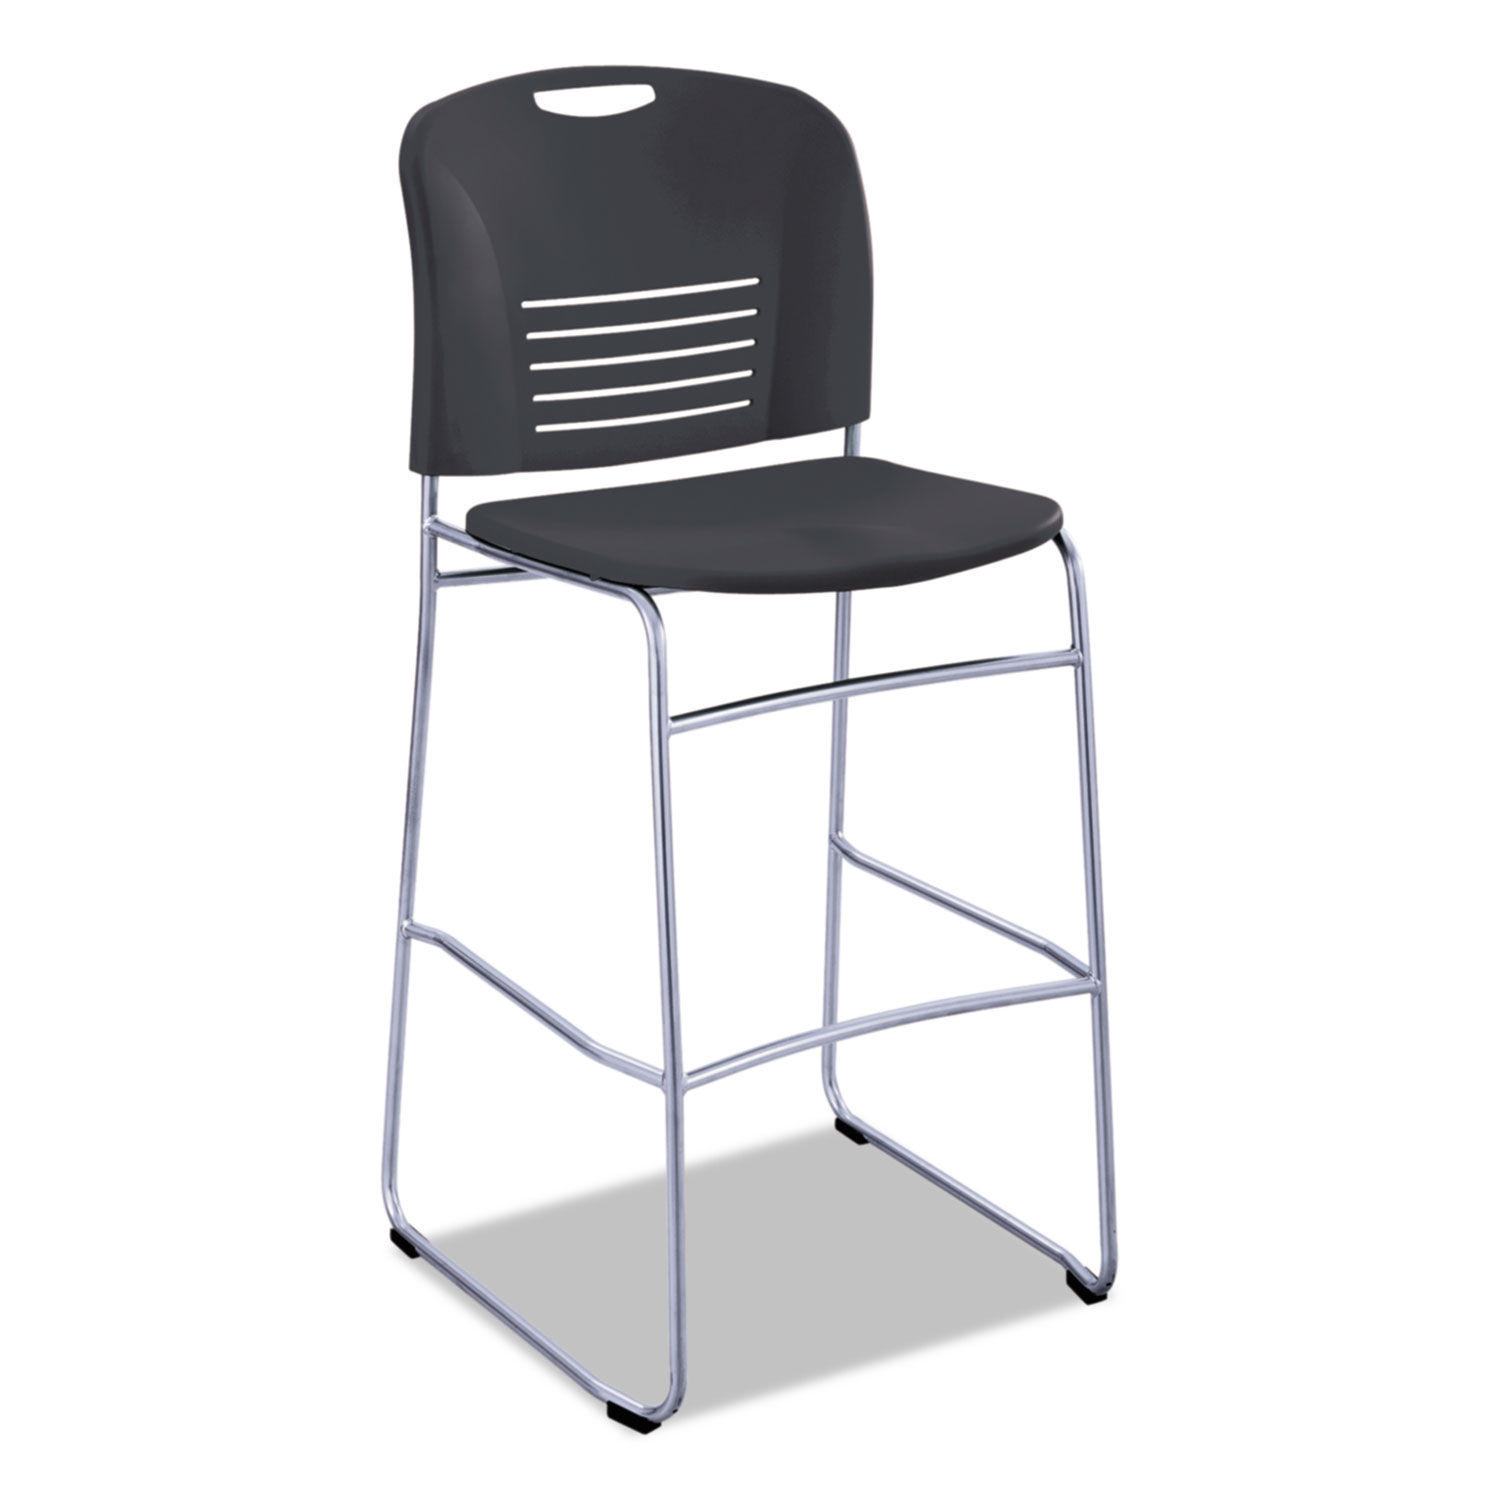 Vy Sled Base Bistro Chair Supports Up to 350 lb, 30.5" Seat Height, Black Seat, Black Back, Silver Base